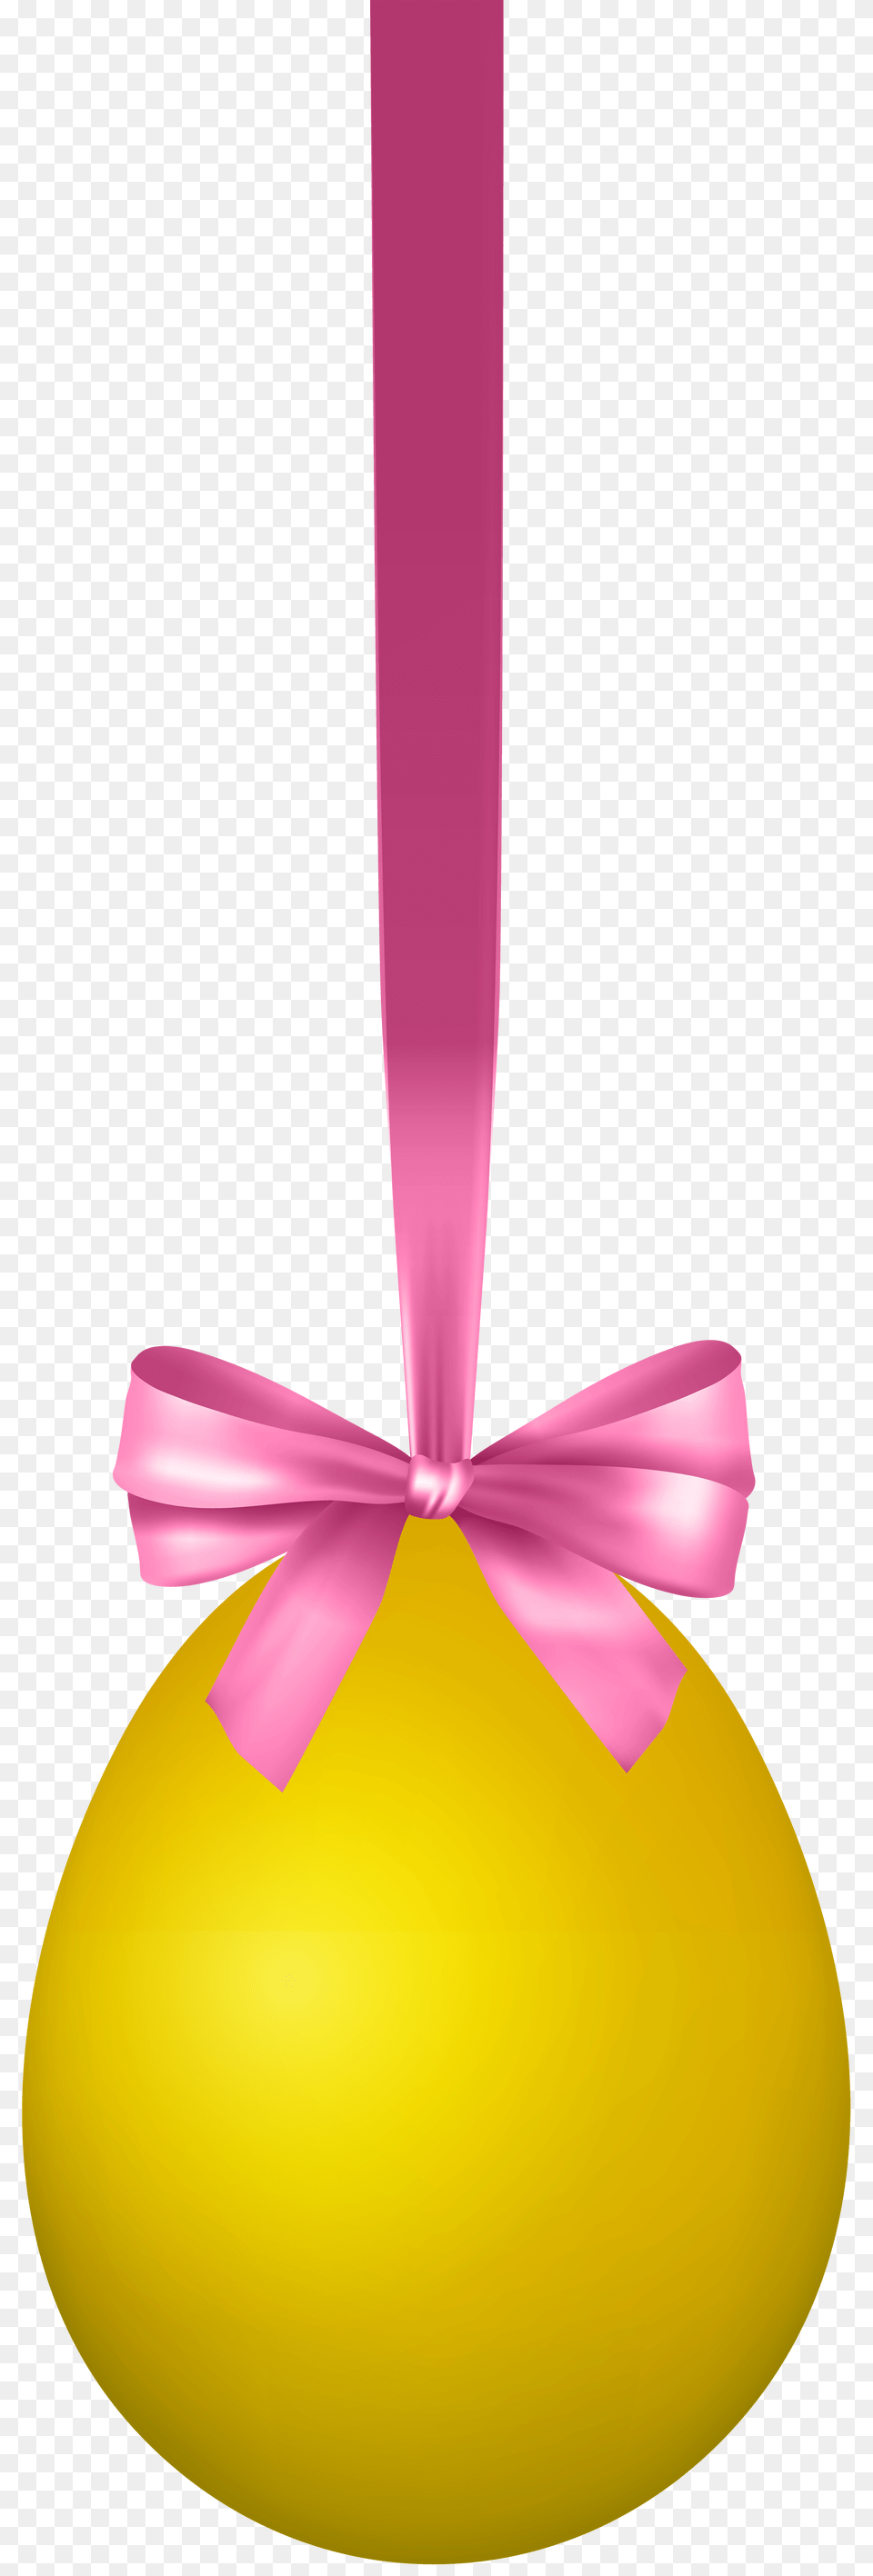 Yellow Hanging Easter Egg With Bow Transparent Clip Art, Food, Easter Egg, Chandelier, Lamp Png